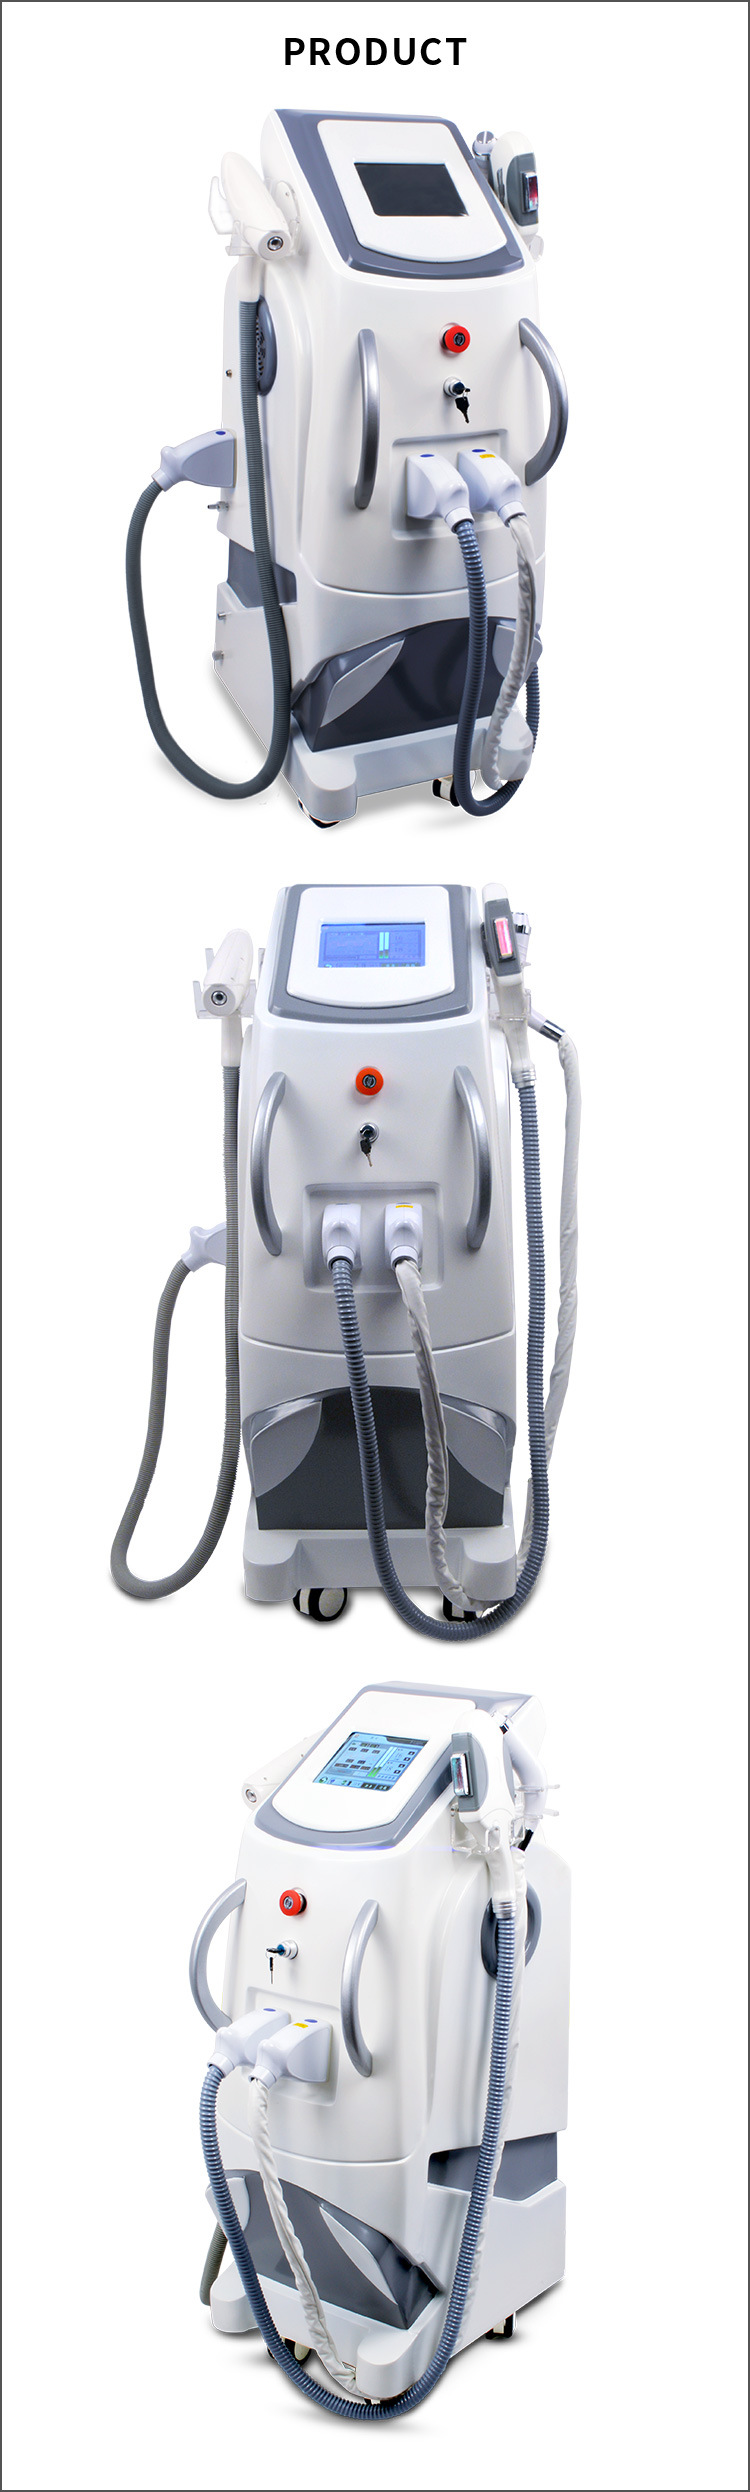 Multi-Functional Laser RF Elight IPL Facial Lifting Skin Care Machine Hair Removal Beauty Equipment